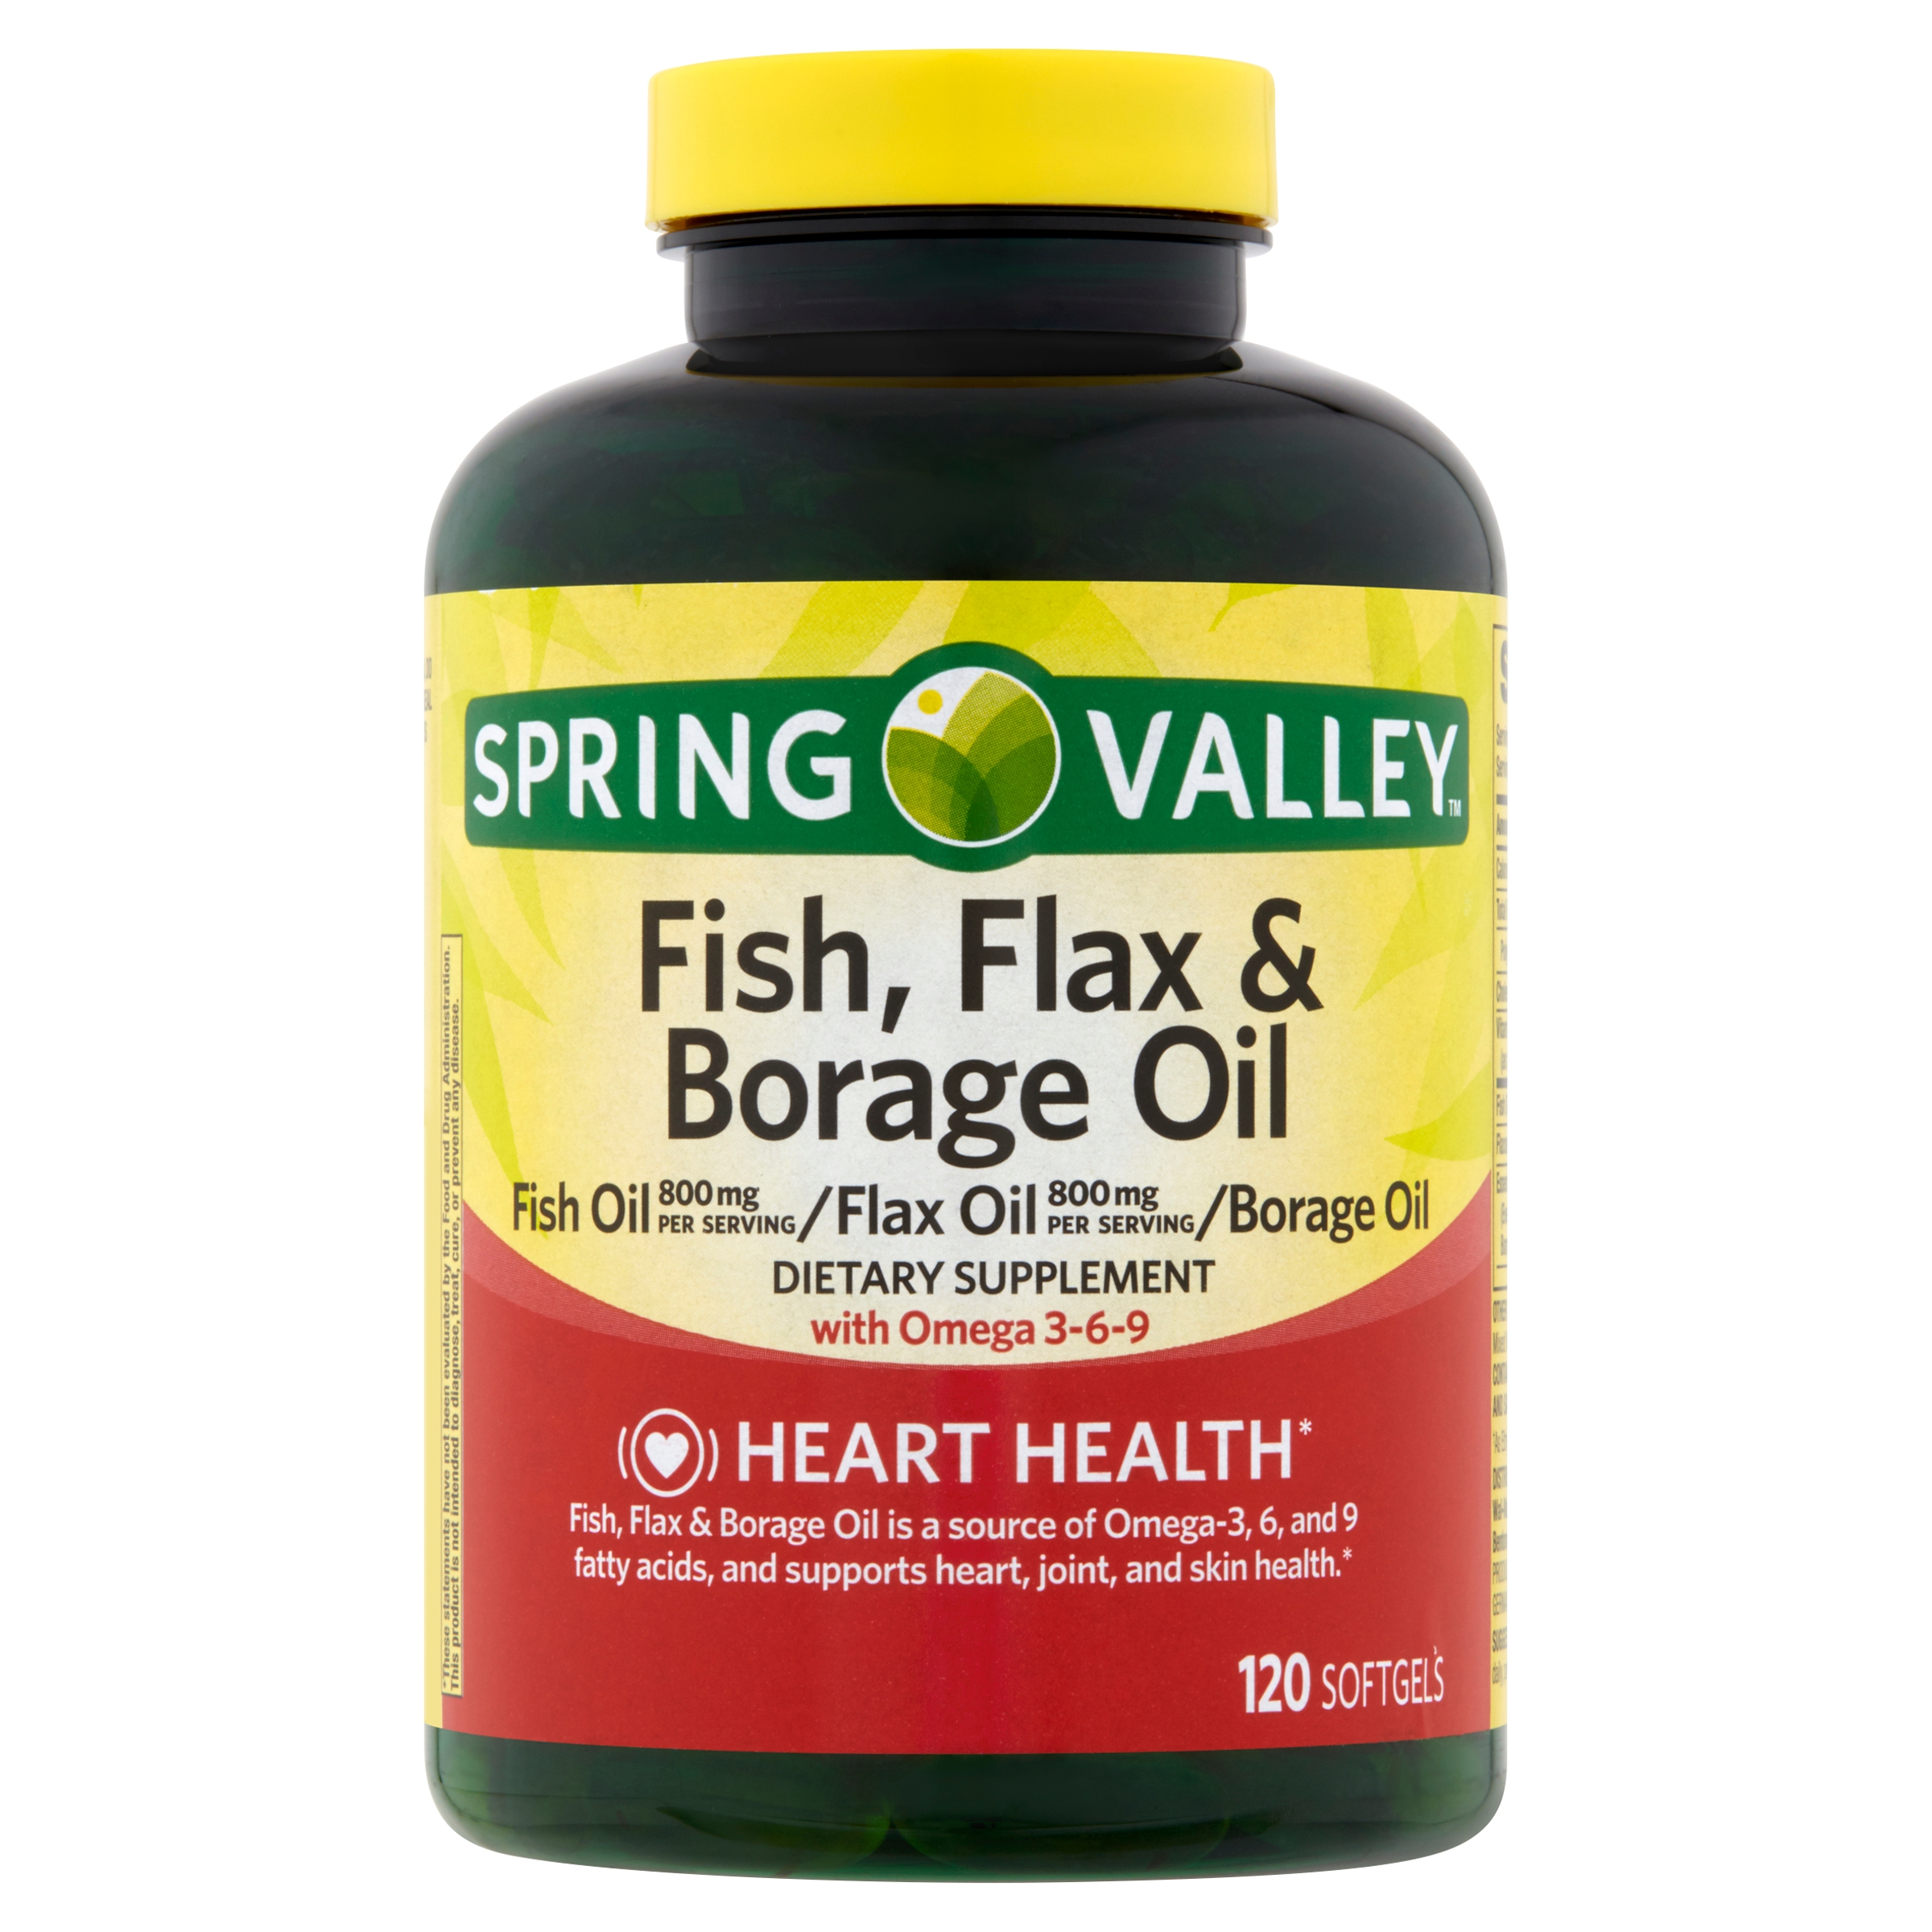 Spring Valley Fish, Flax & Borage Oil Softgels, 120 Count - image 1 of 8